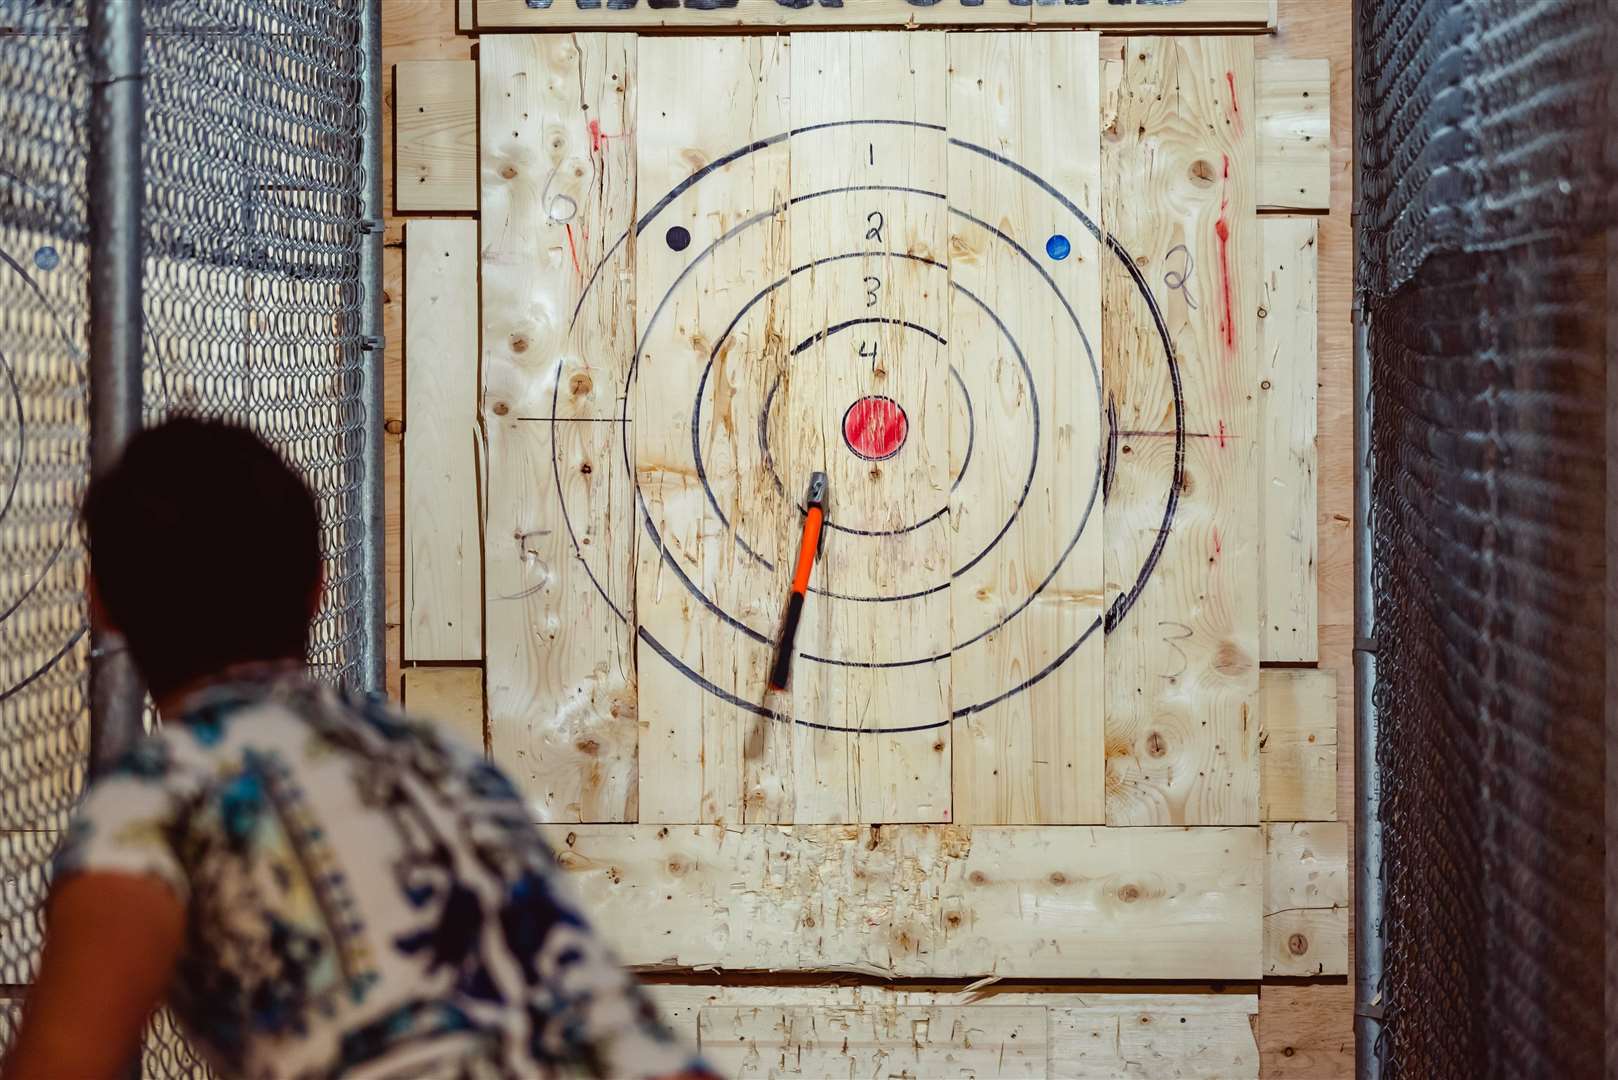 Axe-throwing has gained popularity as a pursuit elsewhere in the UK and in the USA